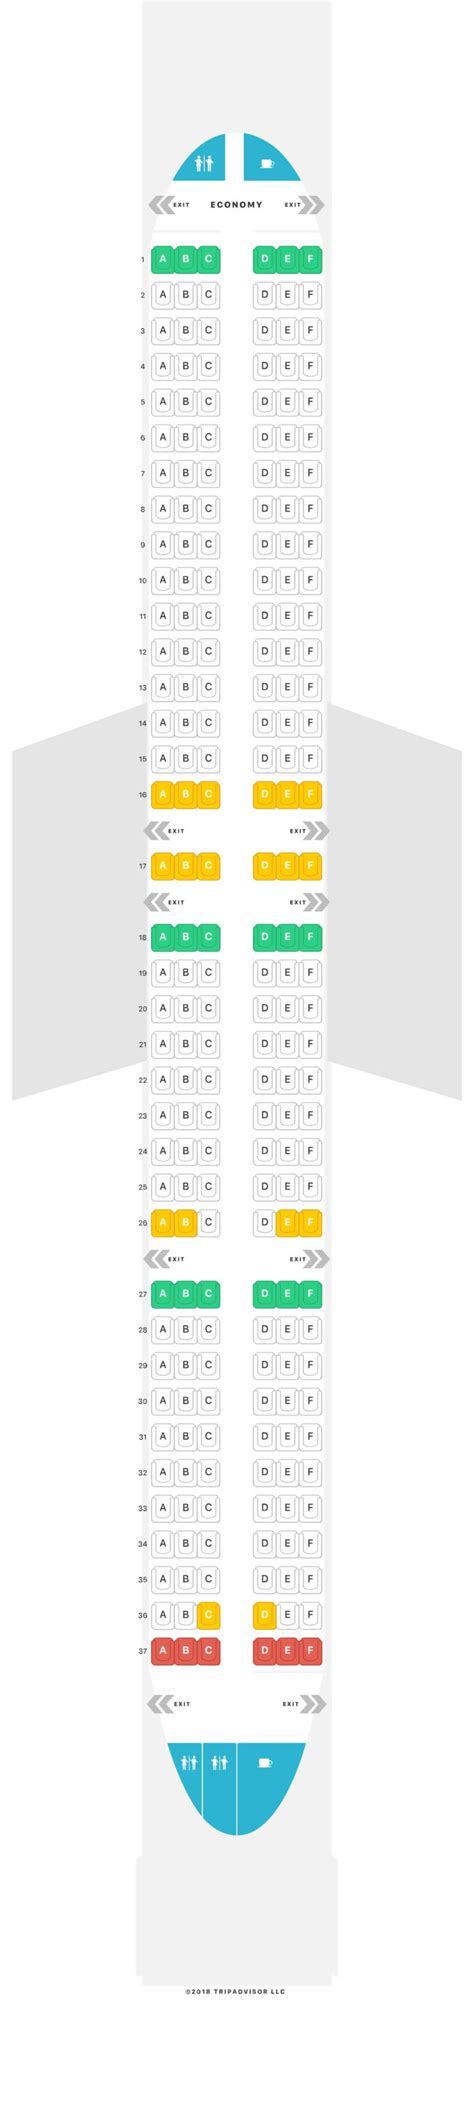 American Airlines Airbus A Neo Seating Chart